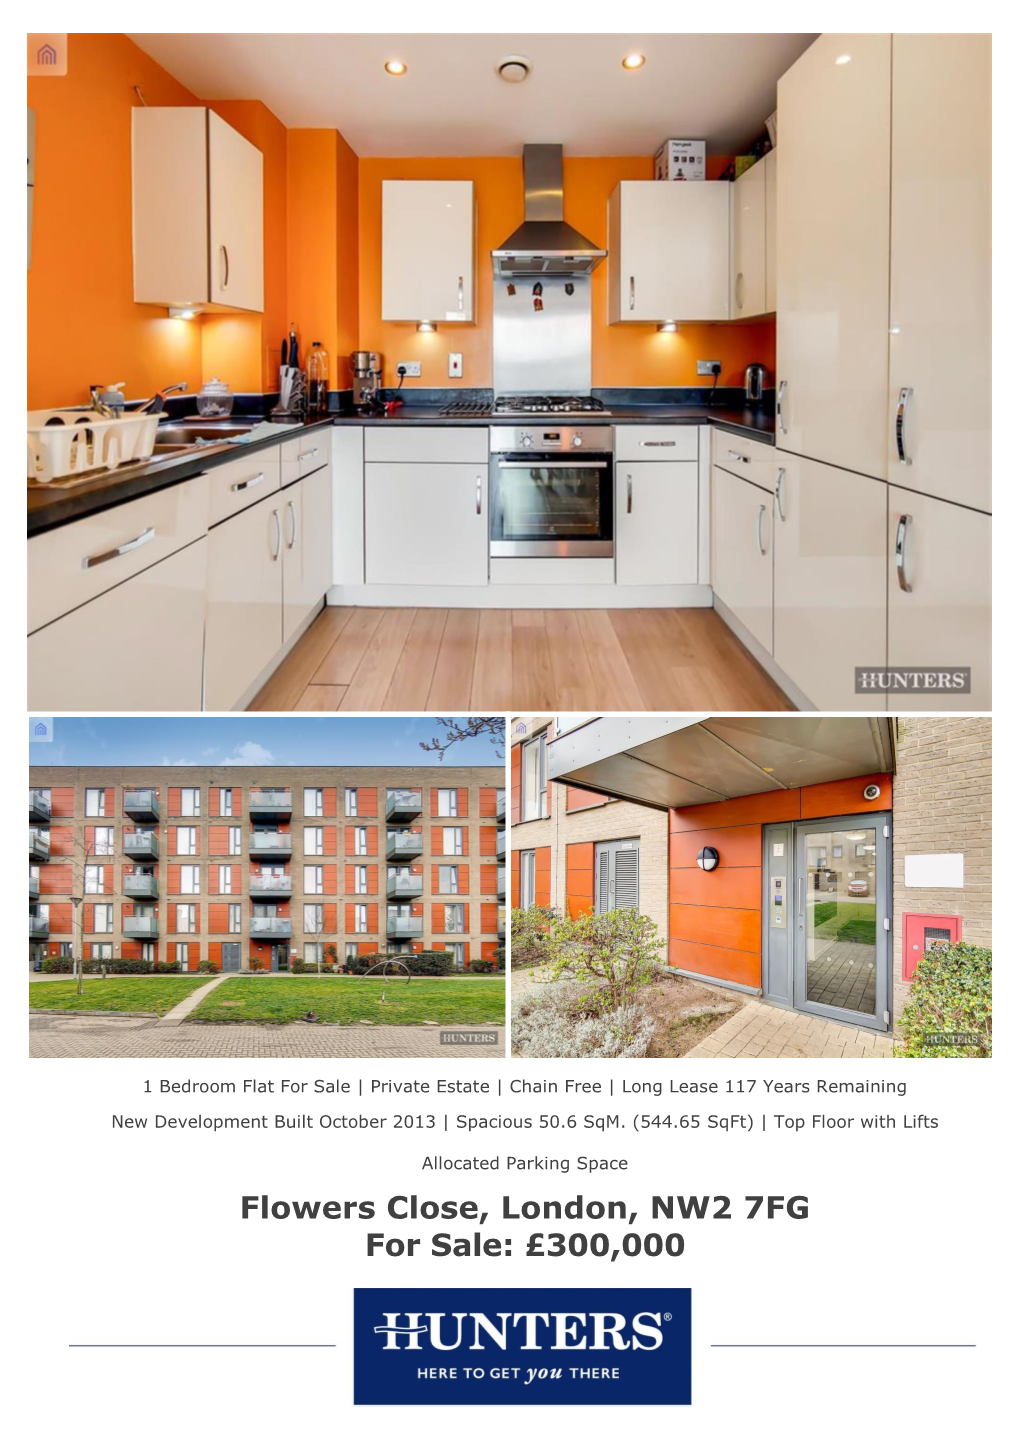 Flowers Close, London, NW2 7FG for Sale: £300,000